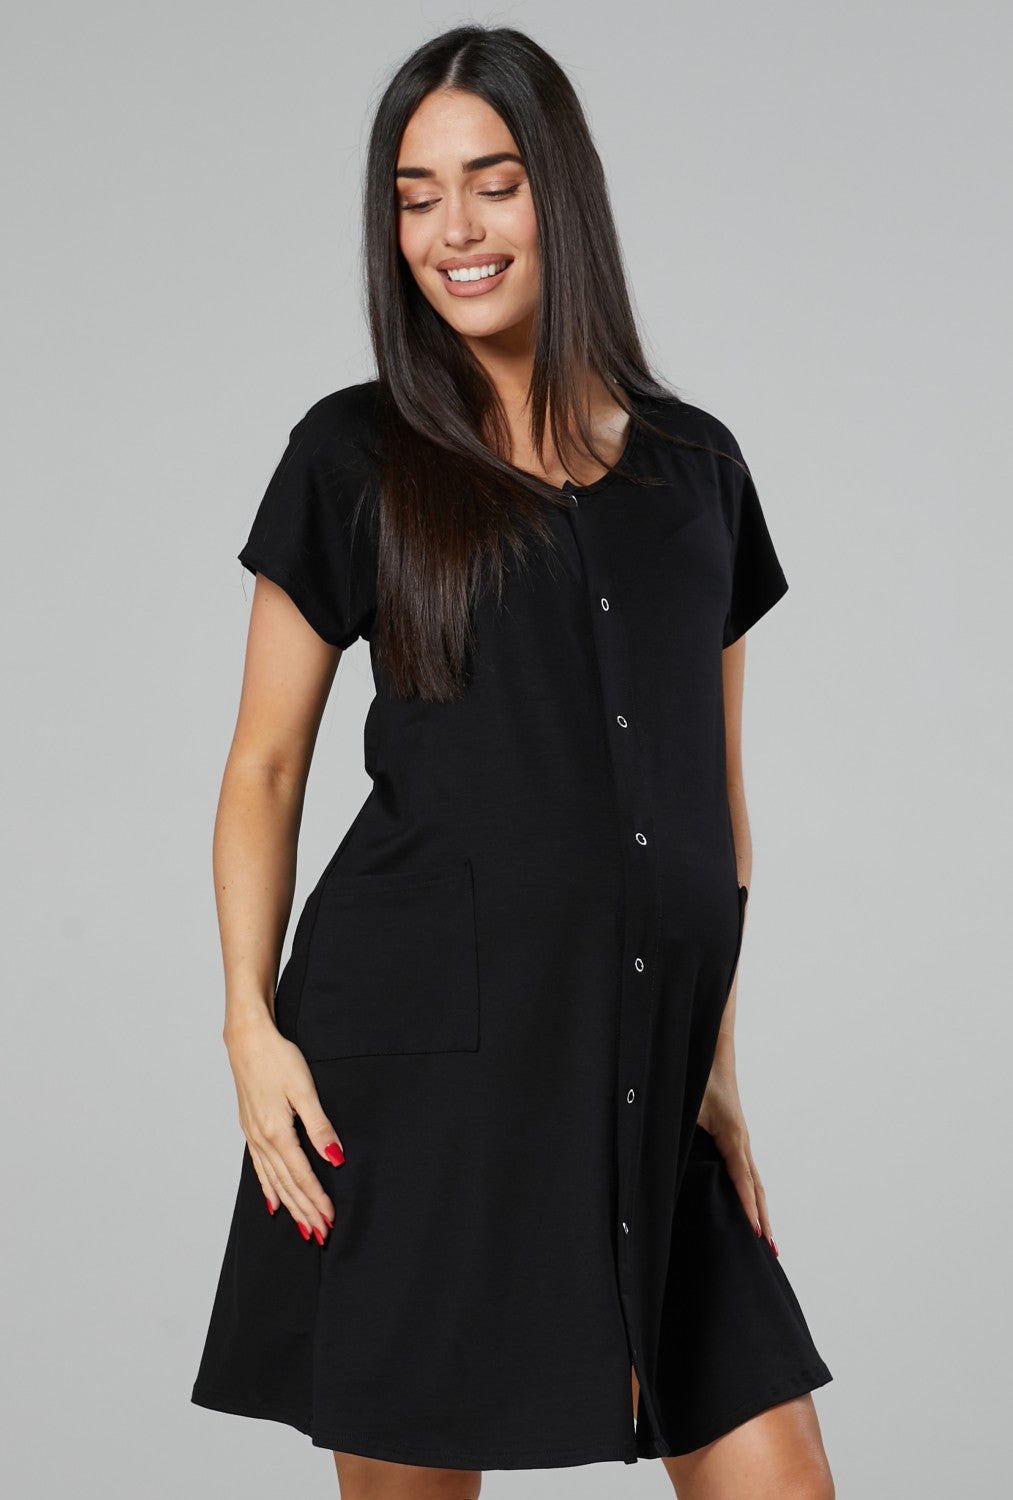 Labour Delivery Nursing Gown 3-Pack